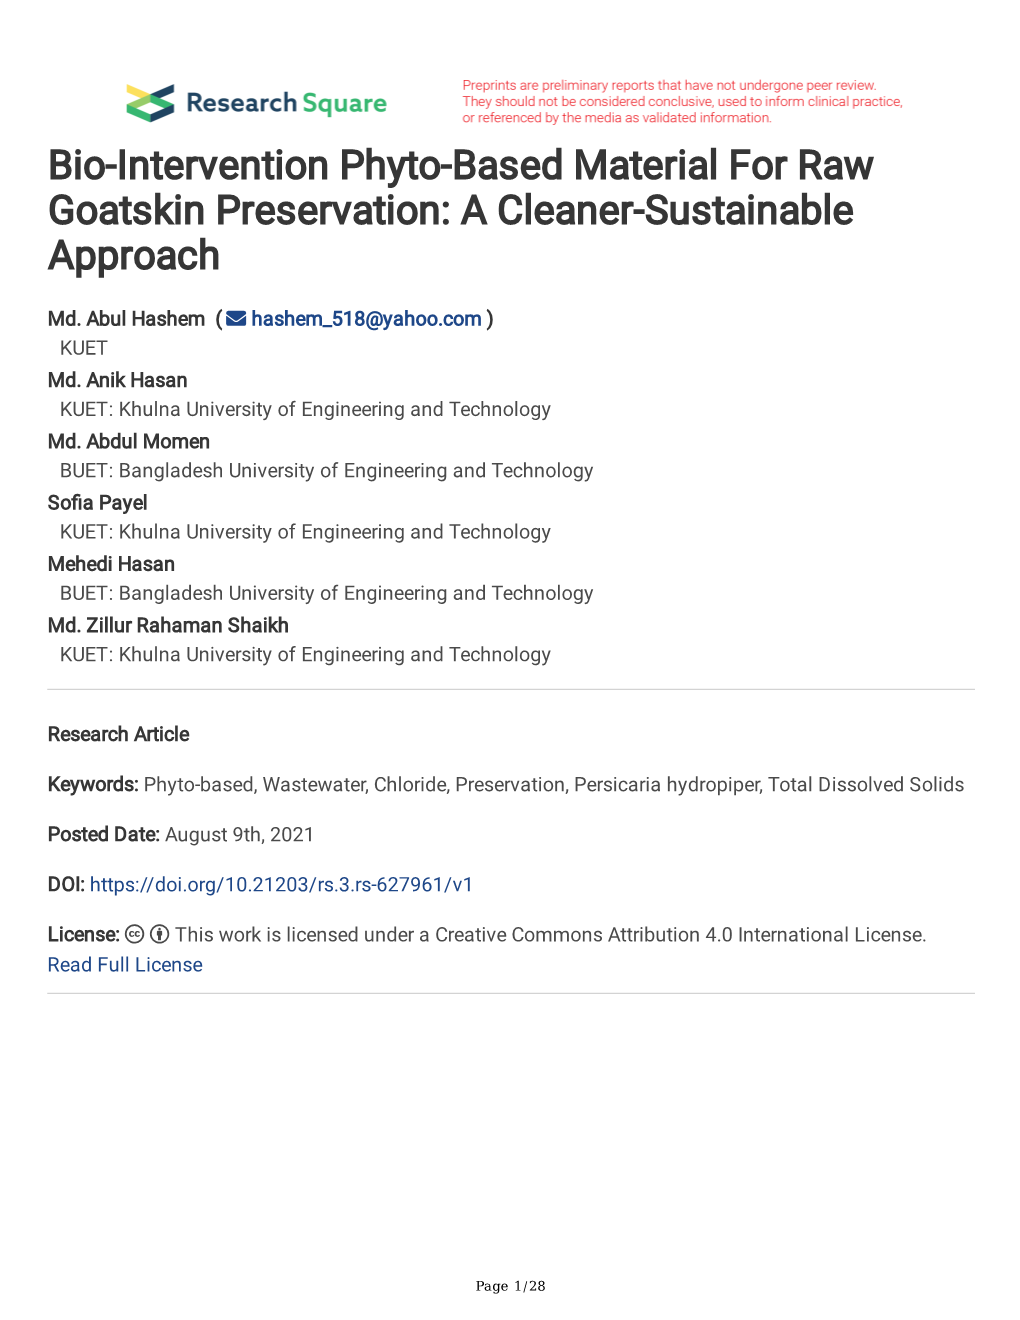 Bio-Intervention Phyto-Based Material for Raw Goatskin Preservation: a Cleaner-Sustainable Approach